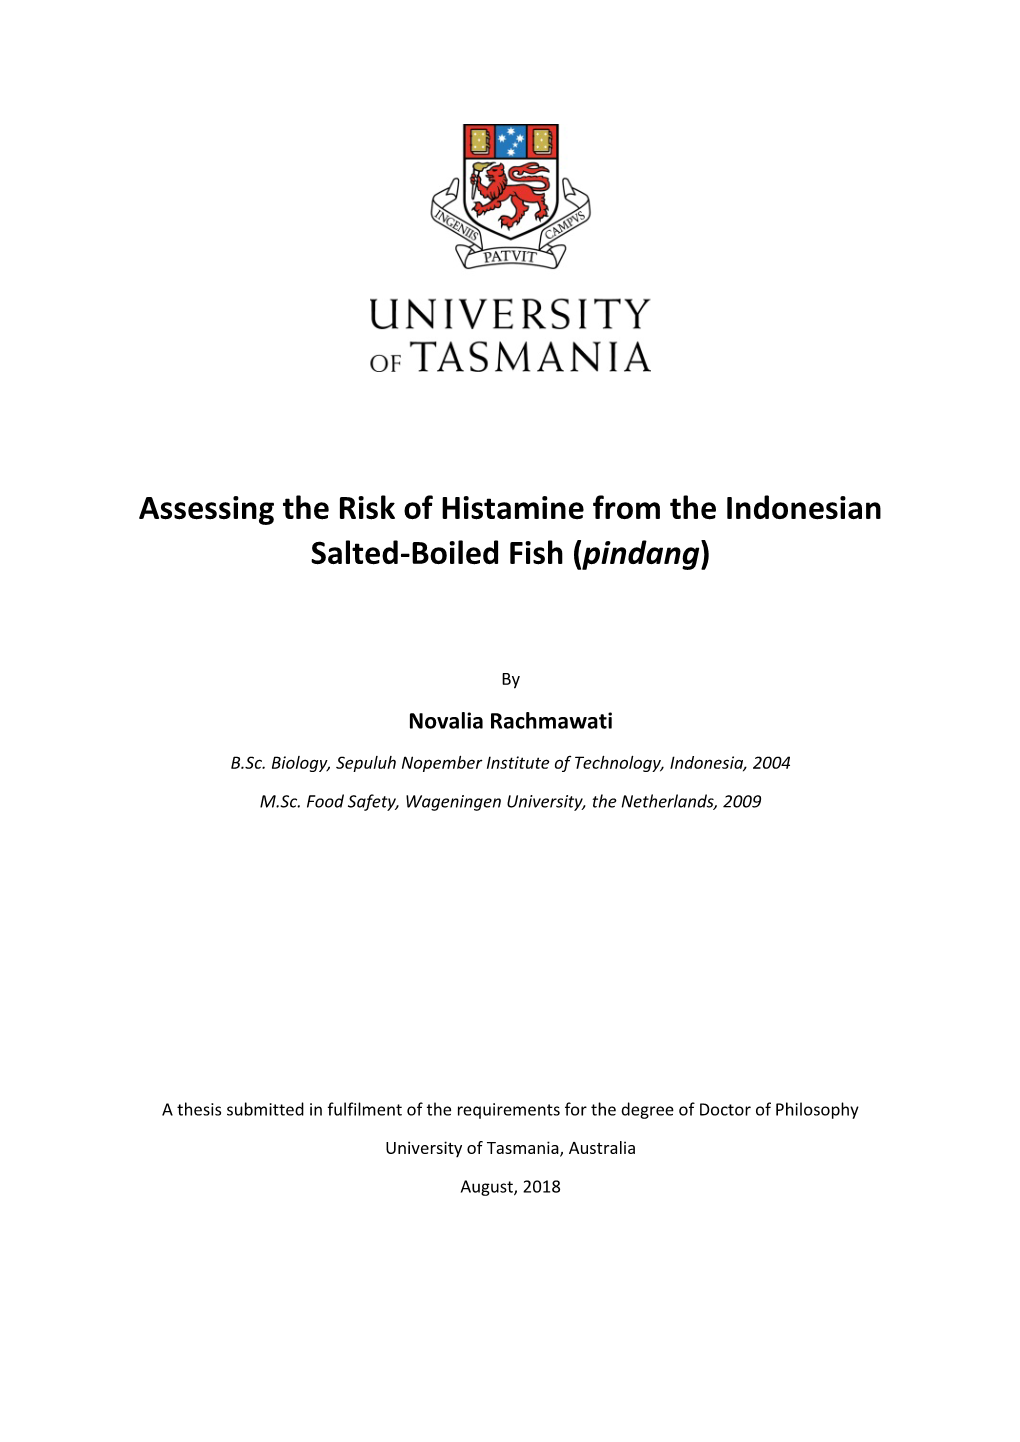 Assessing the Risk of Histamine from the Indonesian Salted-Boiled Fish (Pindang)